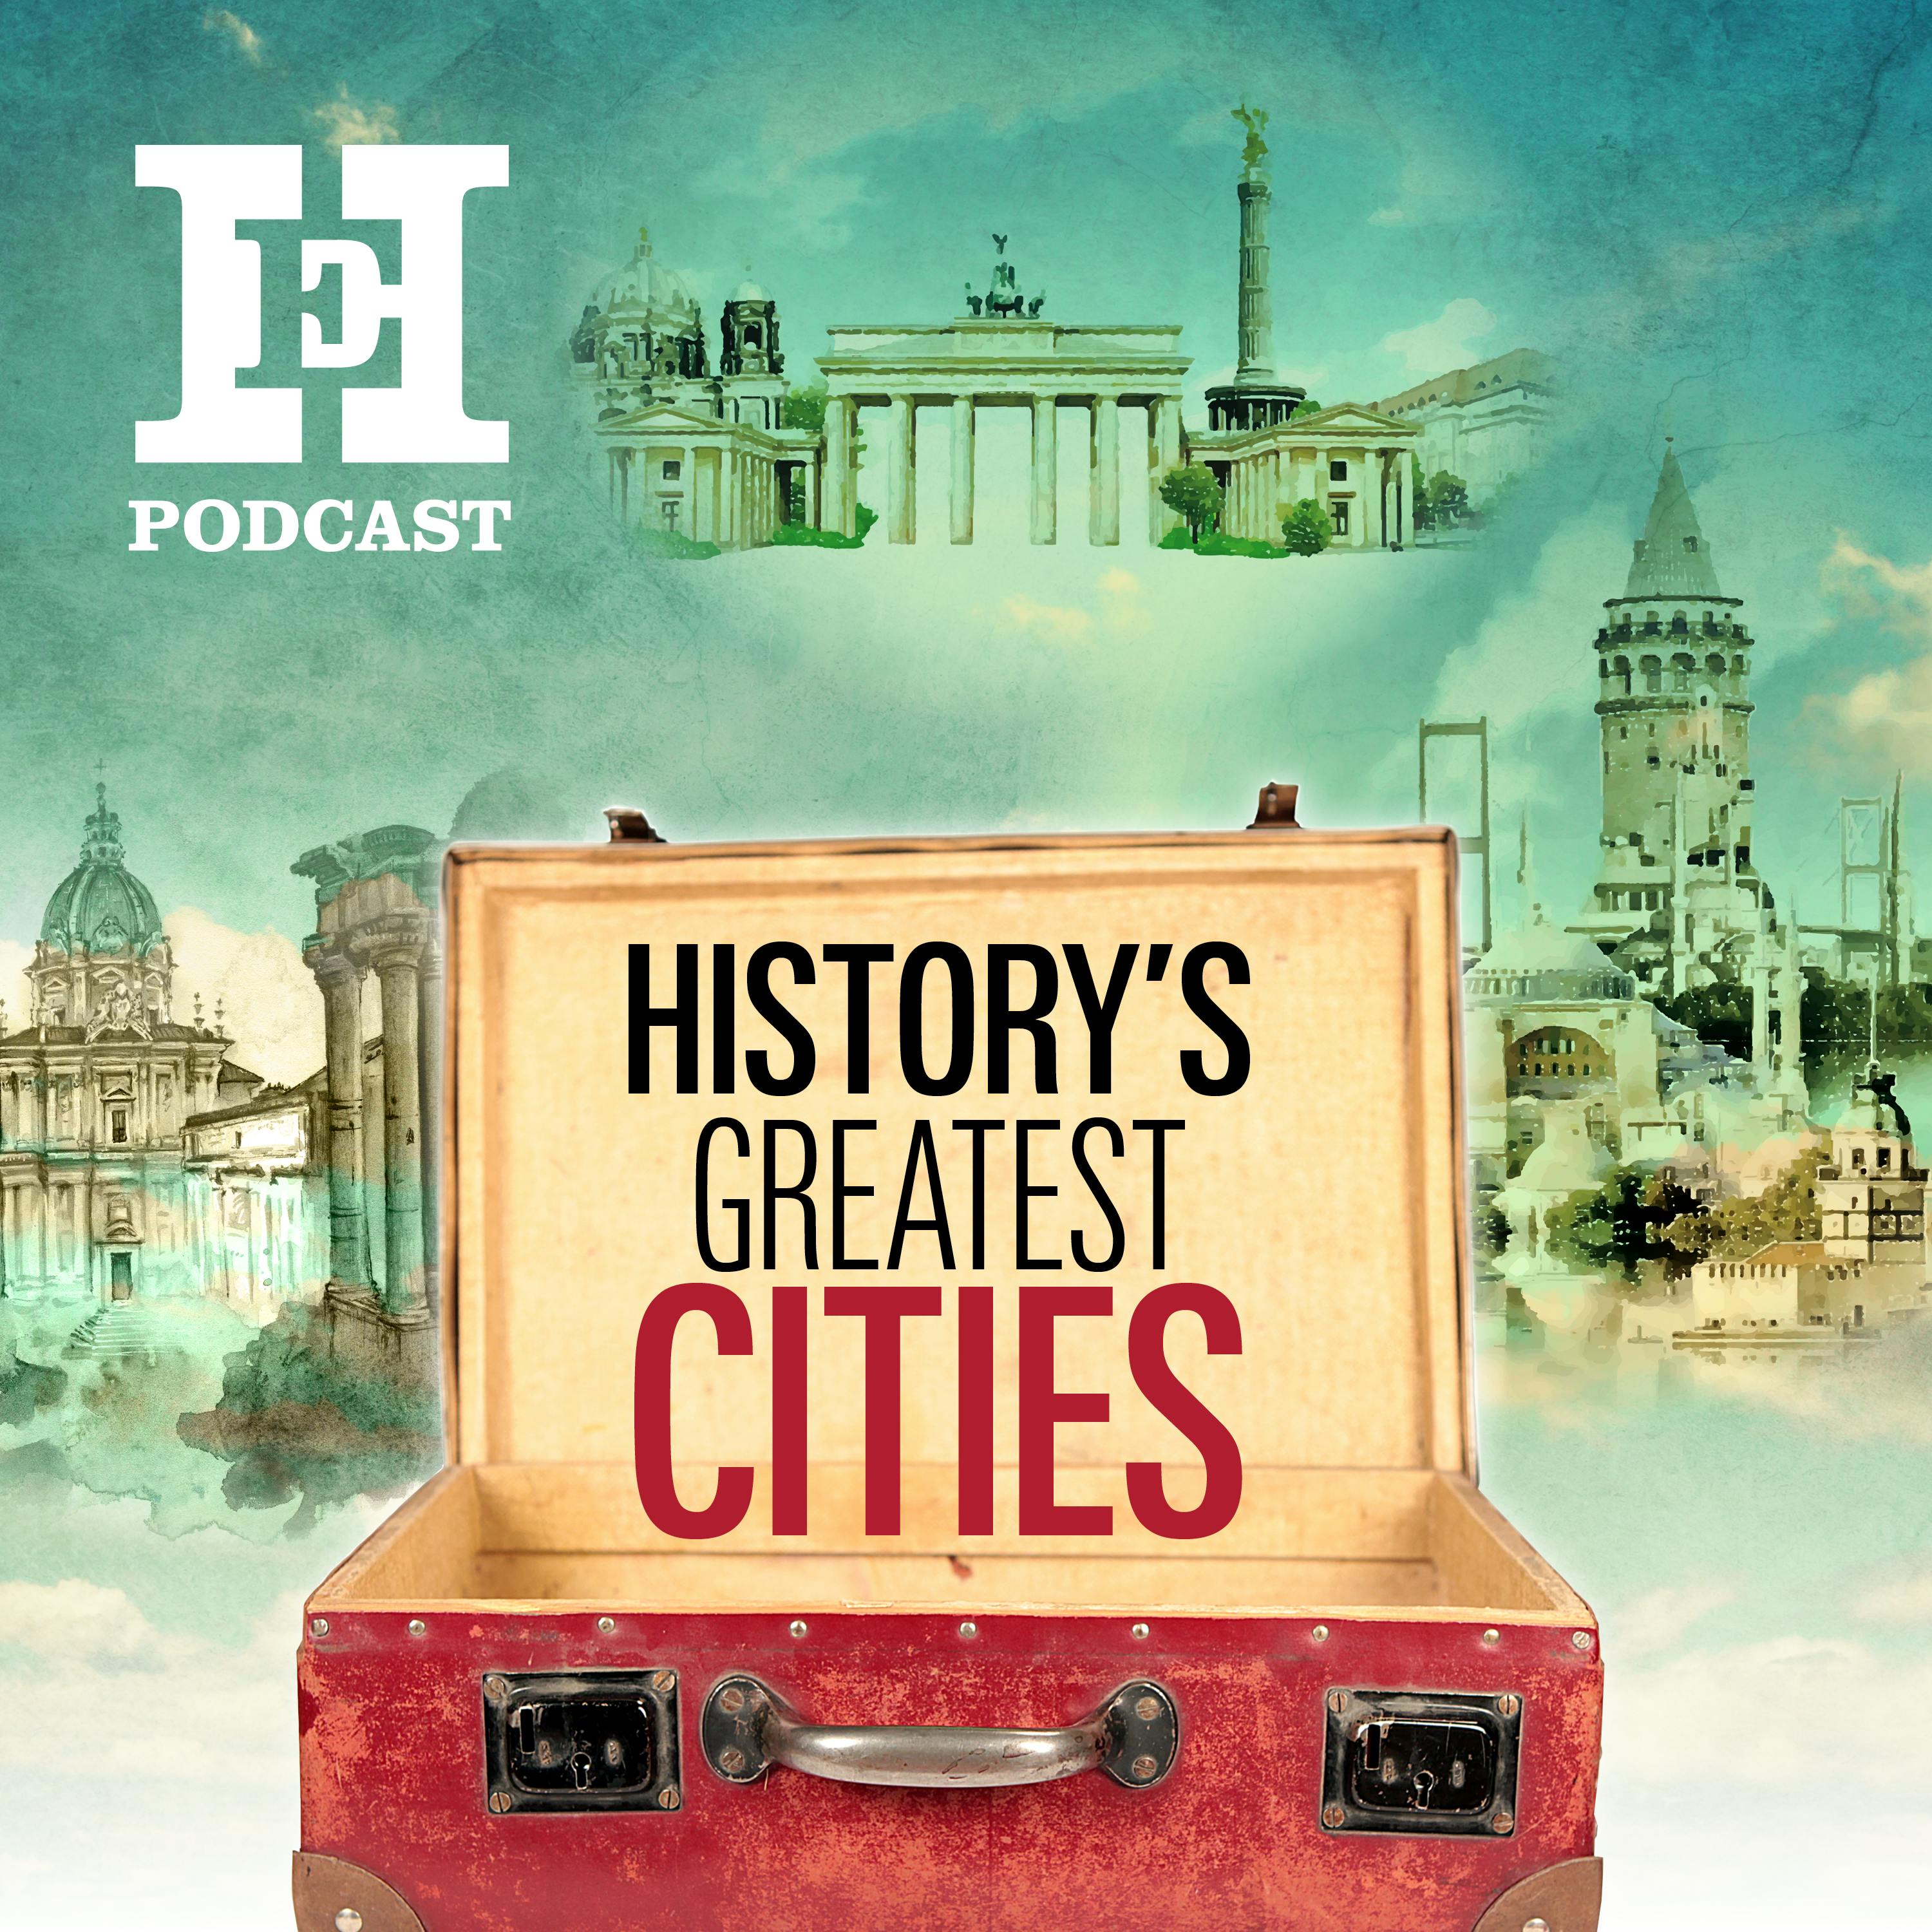 History’s greatest cities | Trailer